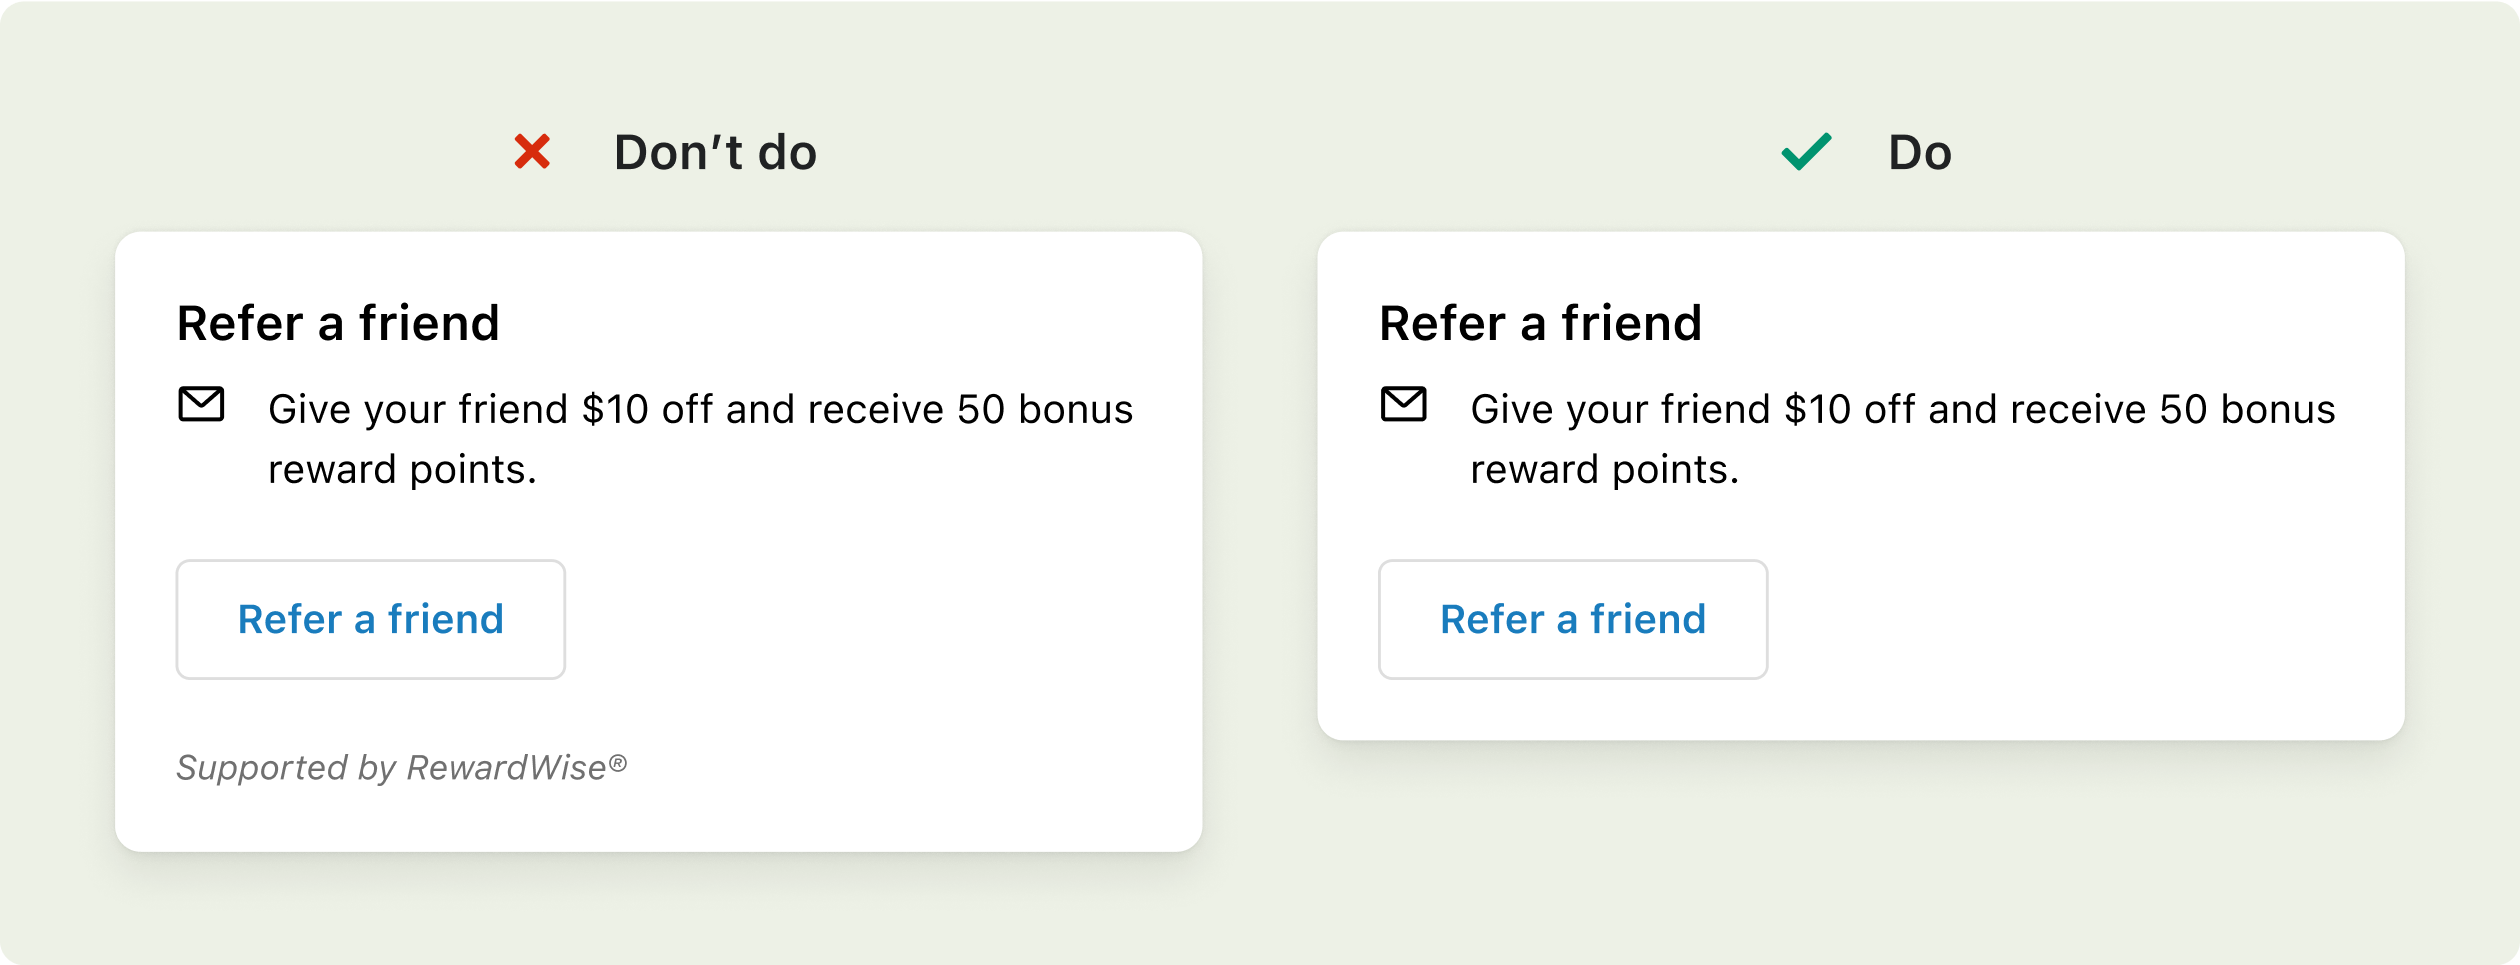 Do and Don't examples of a design for a referral program. The Don't example shows "Supported by RewardWise®" at the bottom of the card, revealing the app's branding. The Do example does not contain the app's brand name.